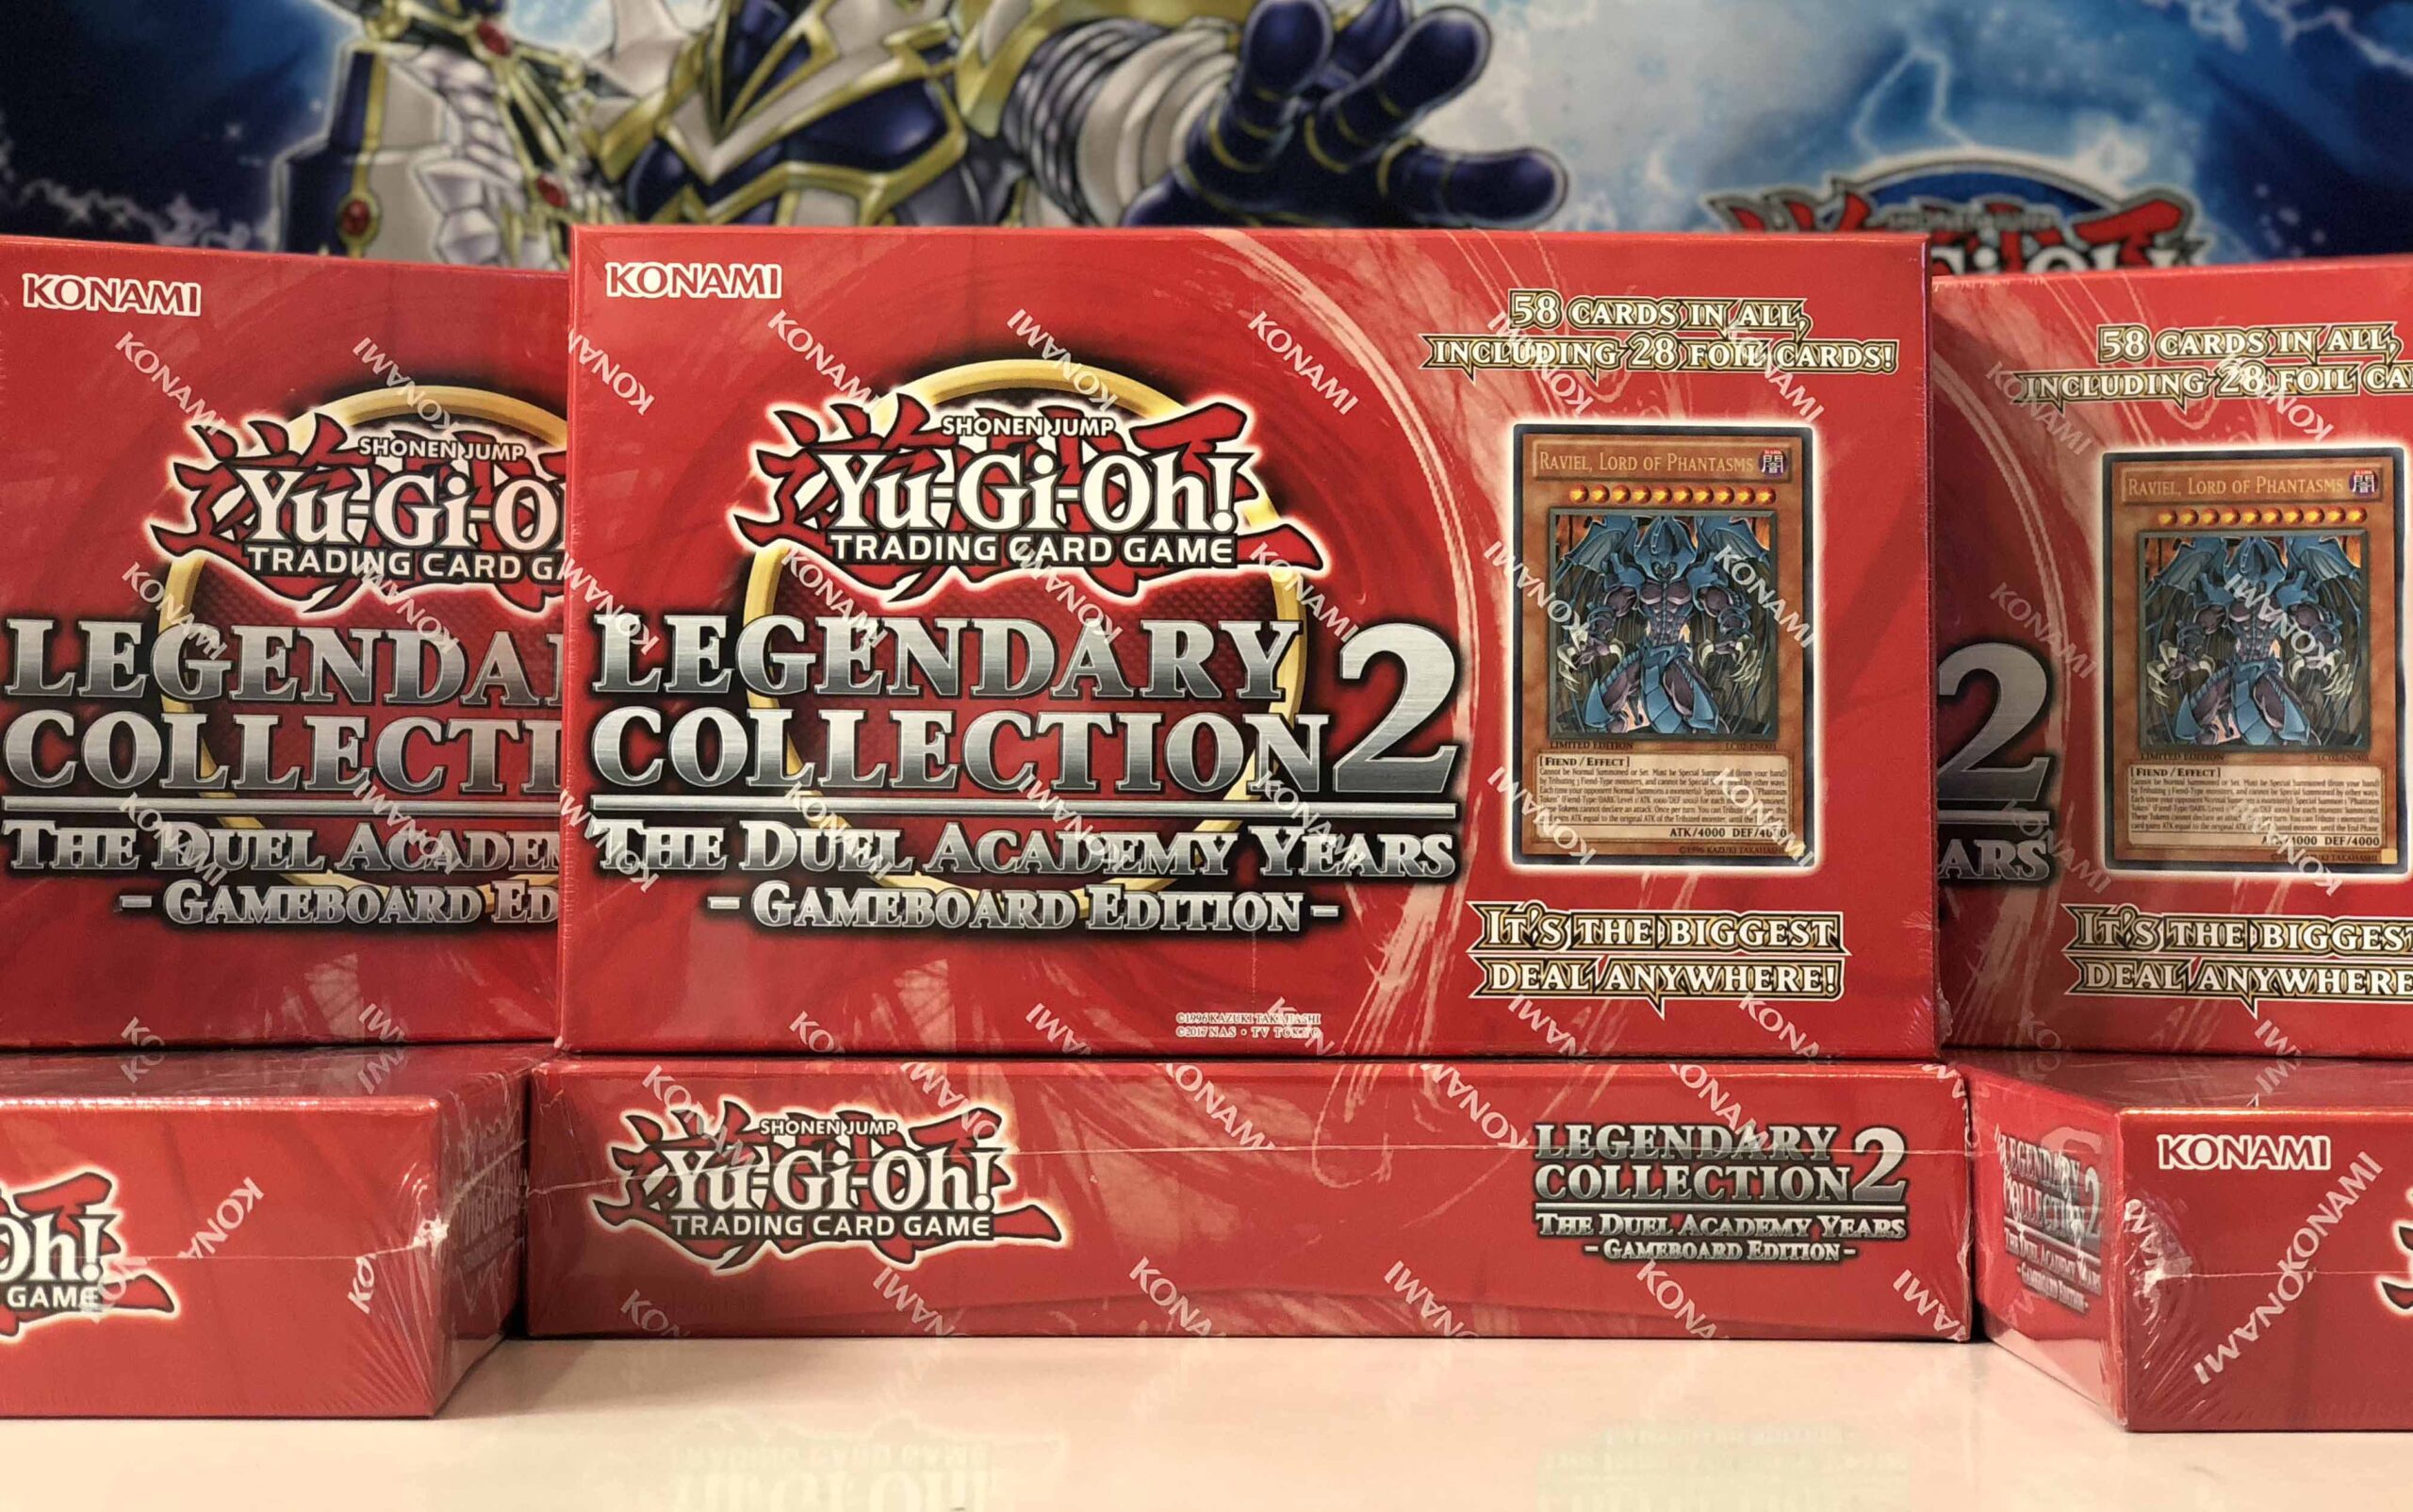 LEGENDARY COLLECTION 2: THE DUEL ACADEMY YEARS – GAMEBOARD EDITION (UK) RESTOCK!!